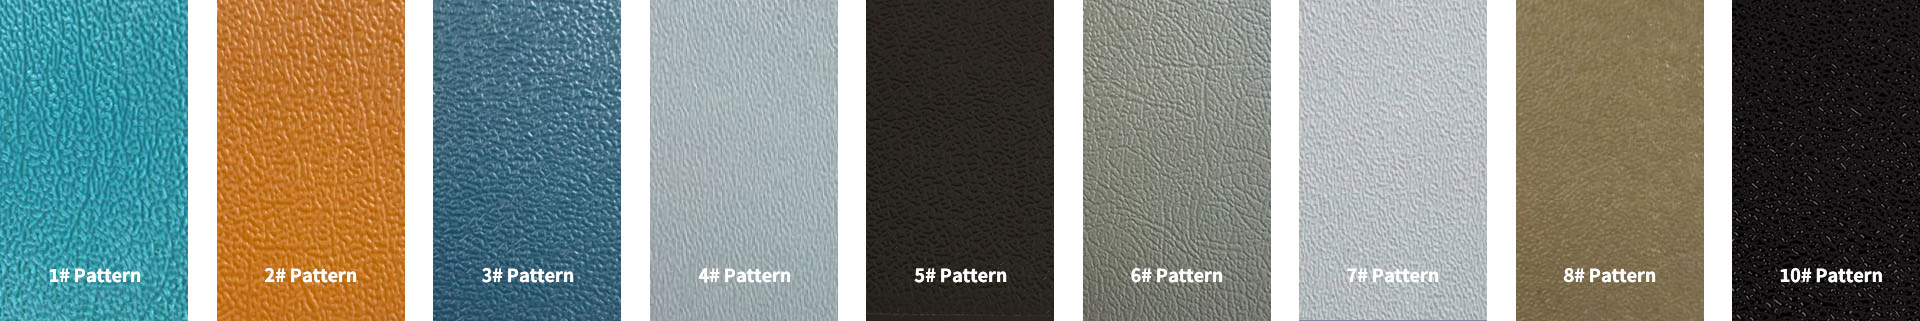 Different colors of ABS Sheet Pattern Board